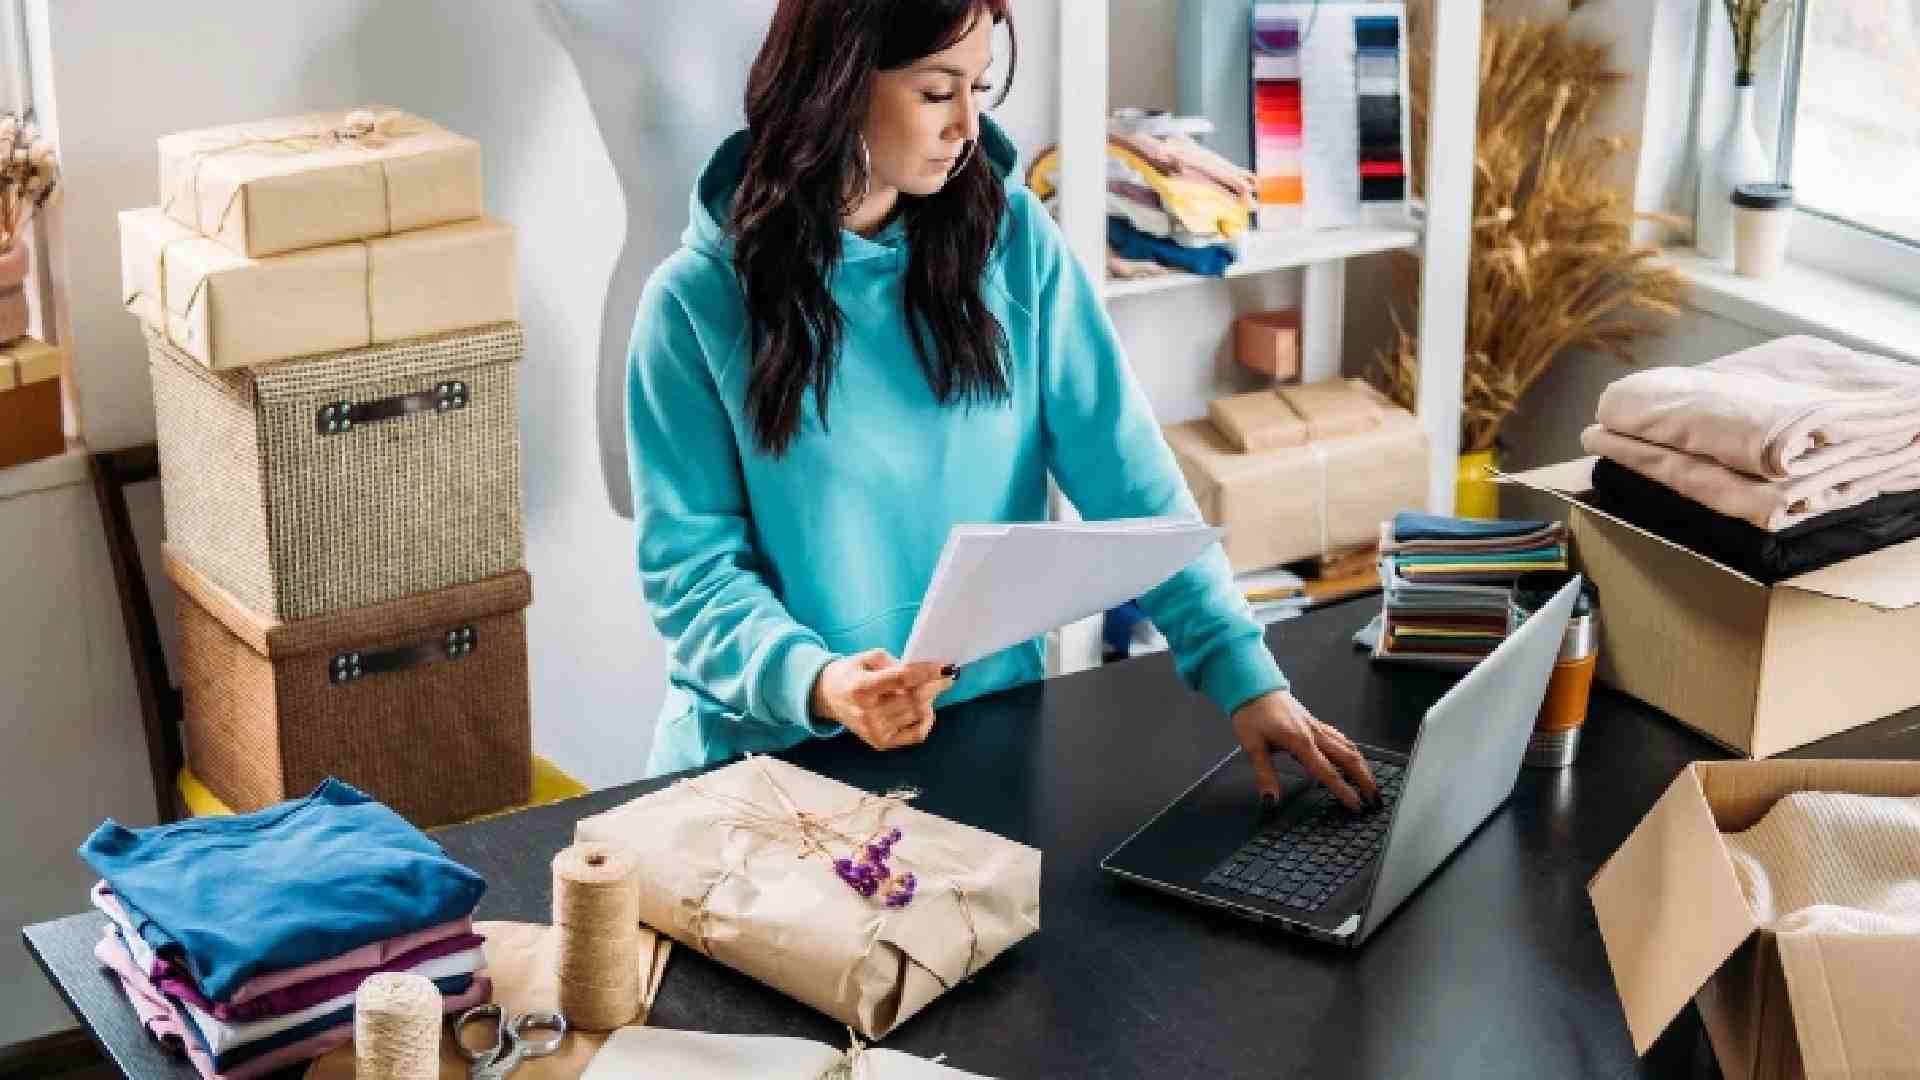 Dropshipping in UAE